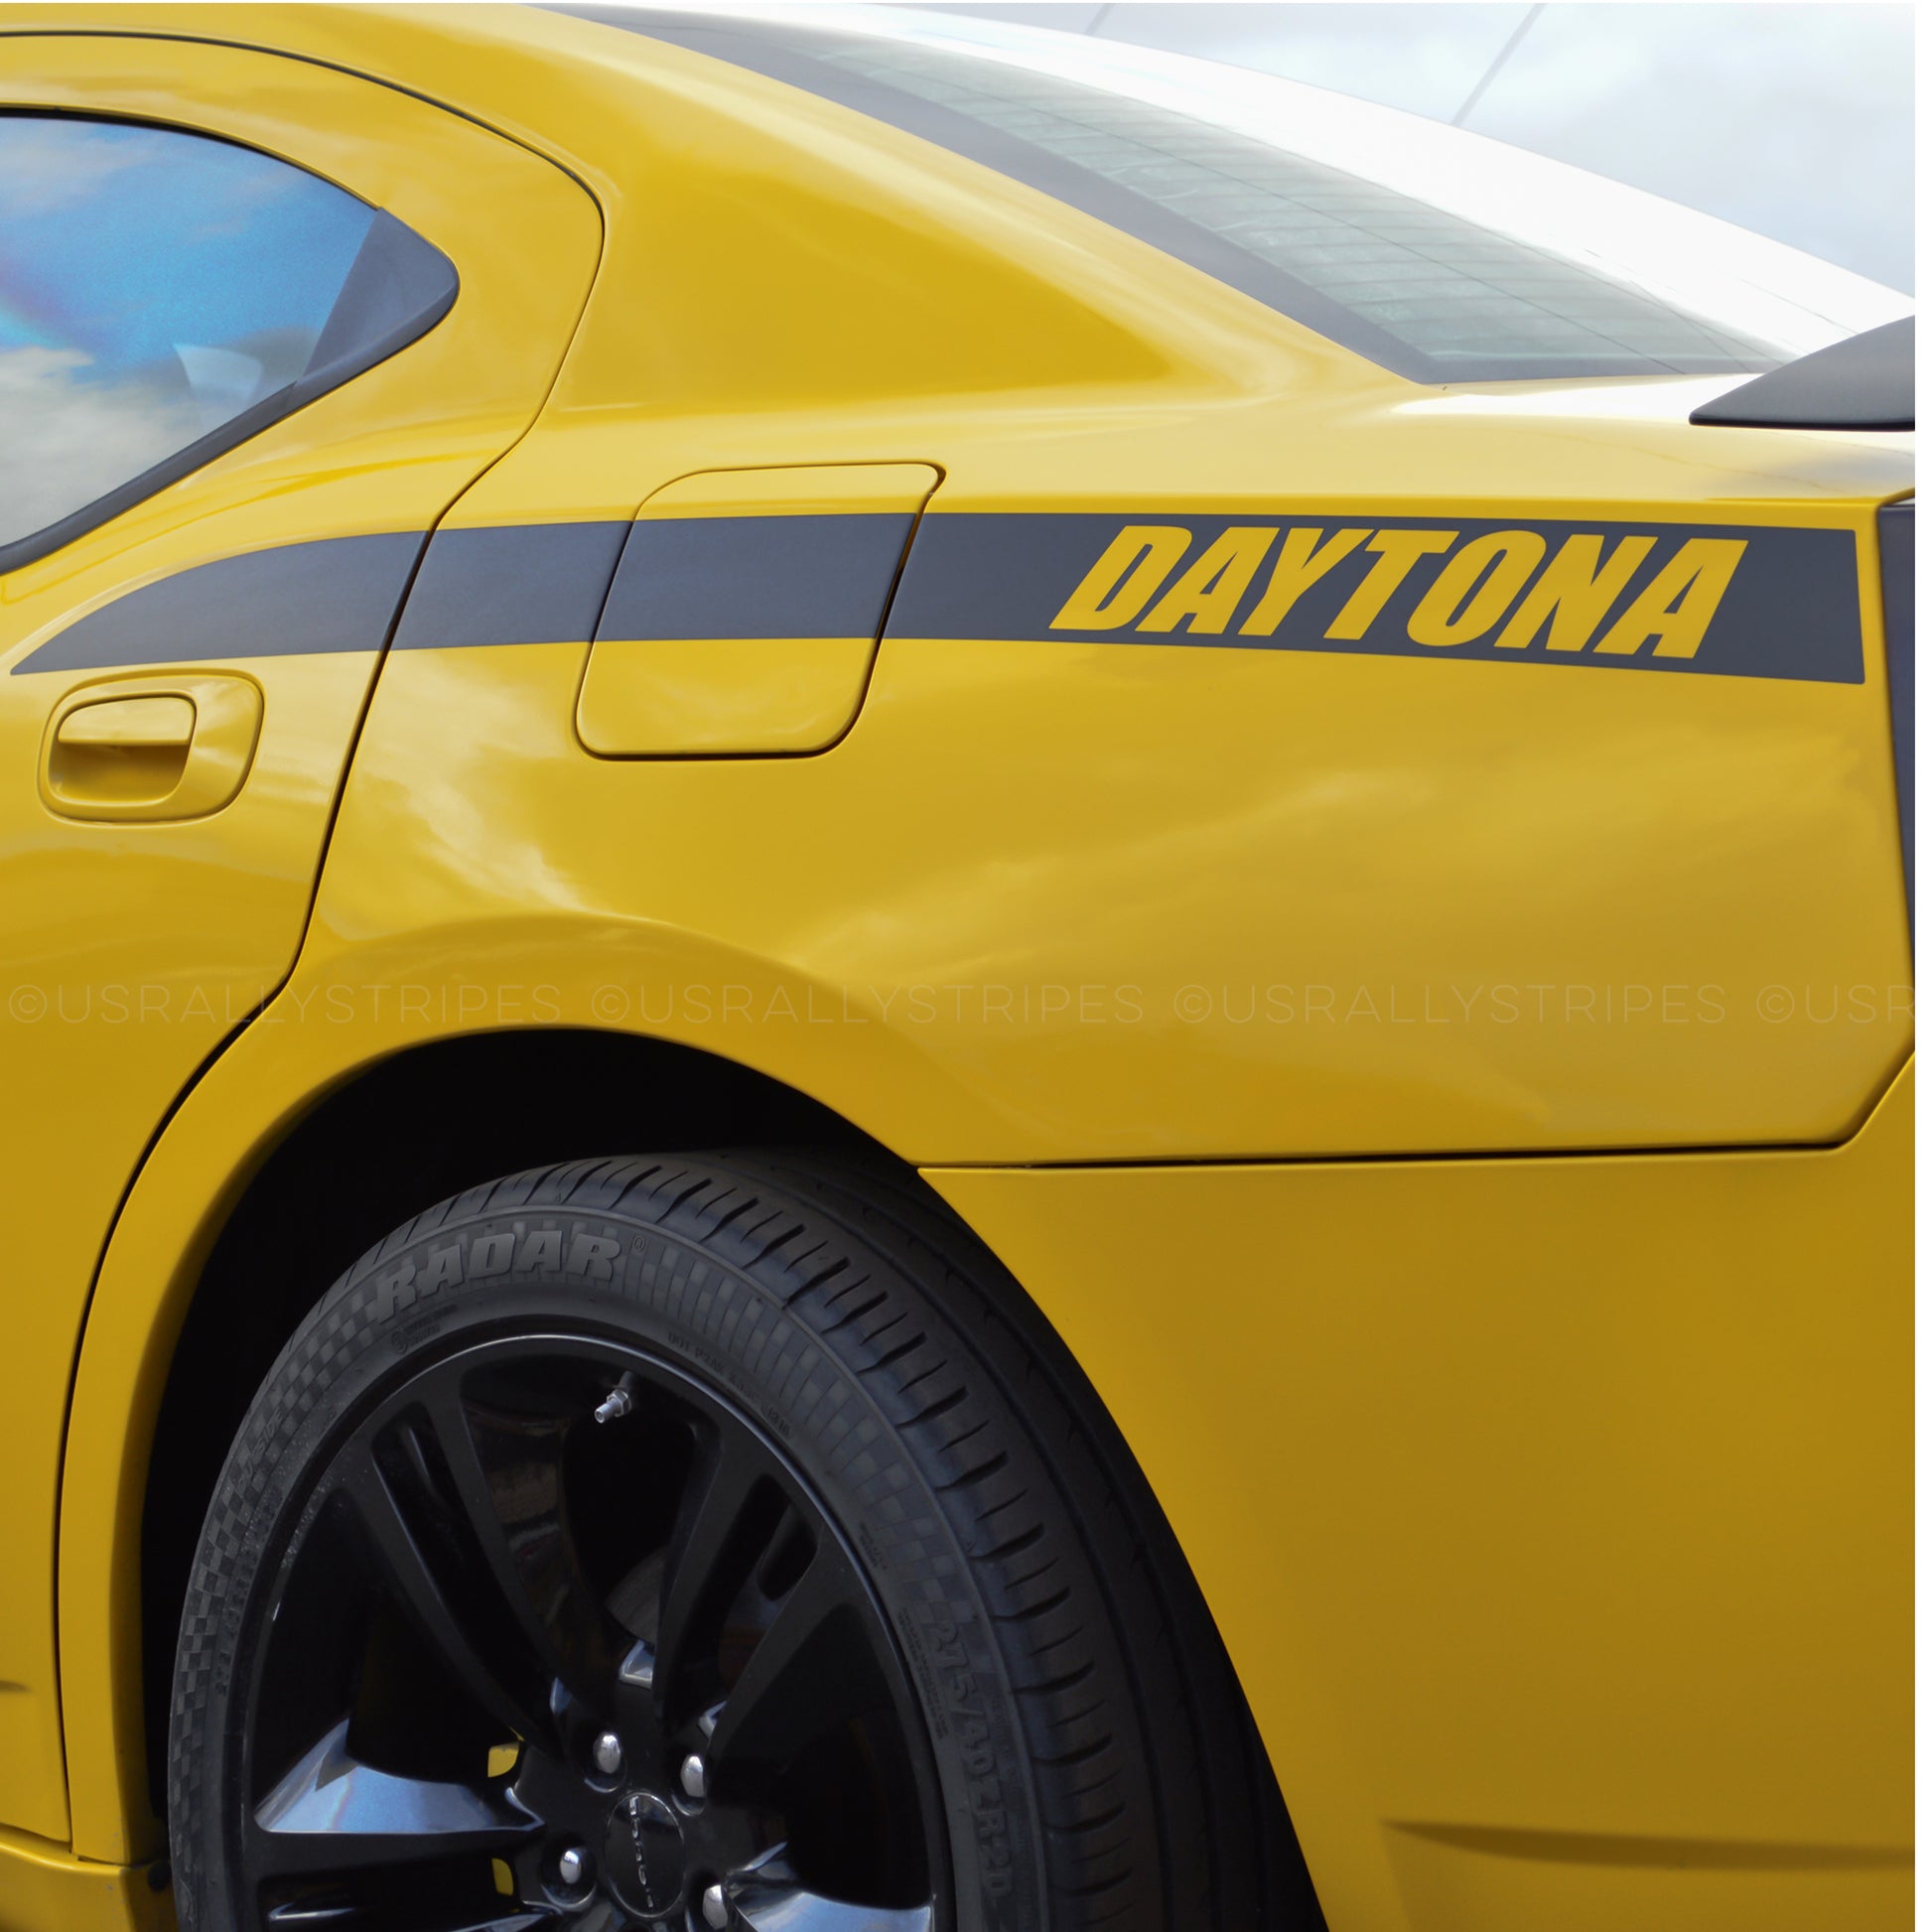 DAYTONA style quarter panel accent side decal fits Dodge Charger 2006-2010 - US Rallystripes